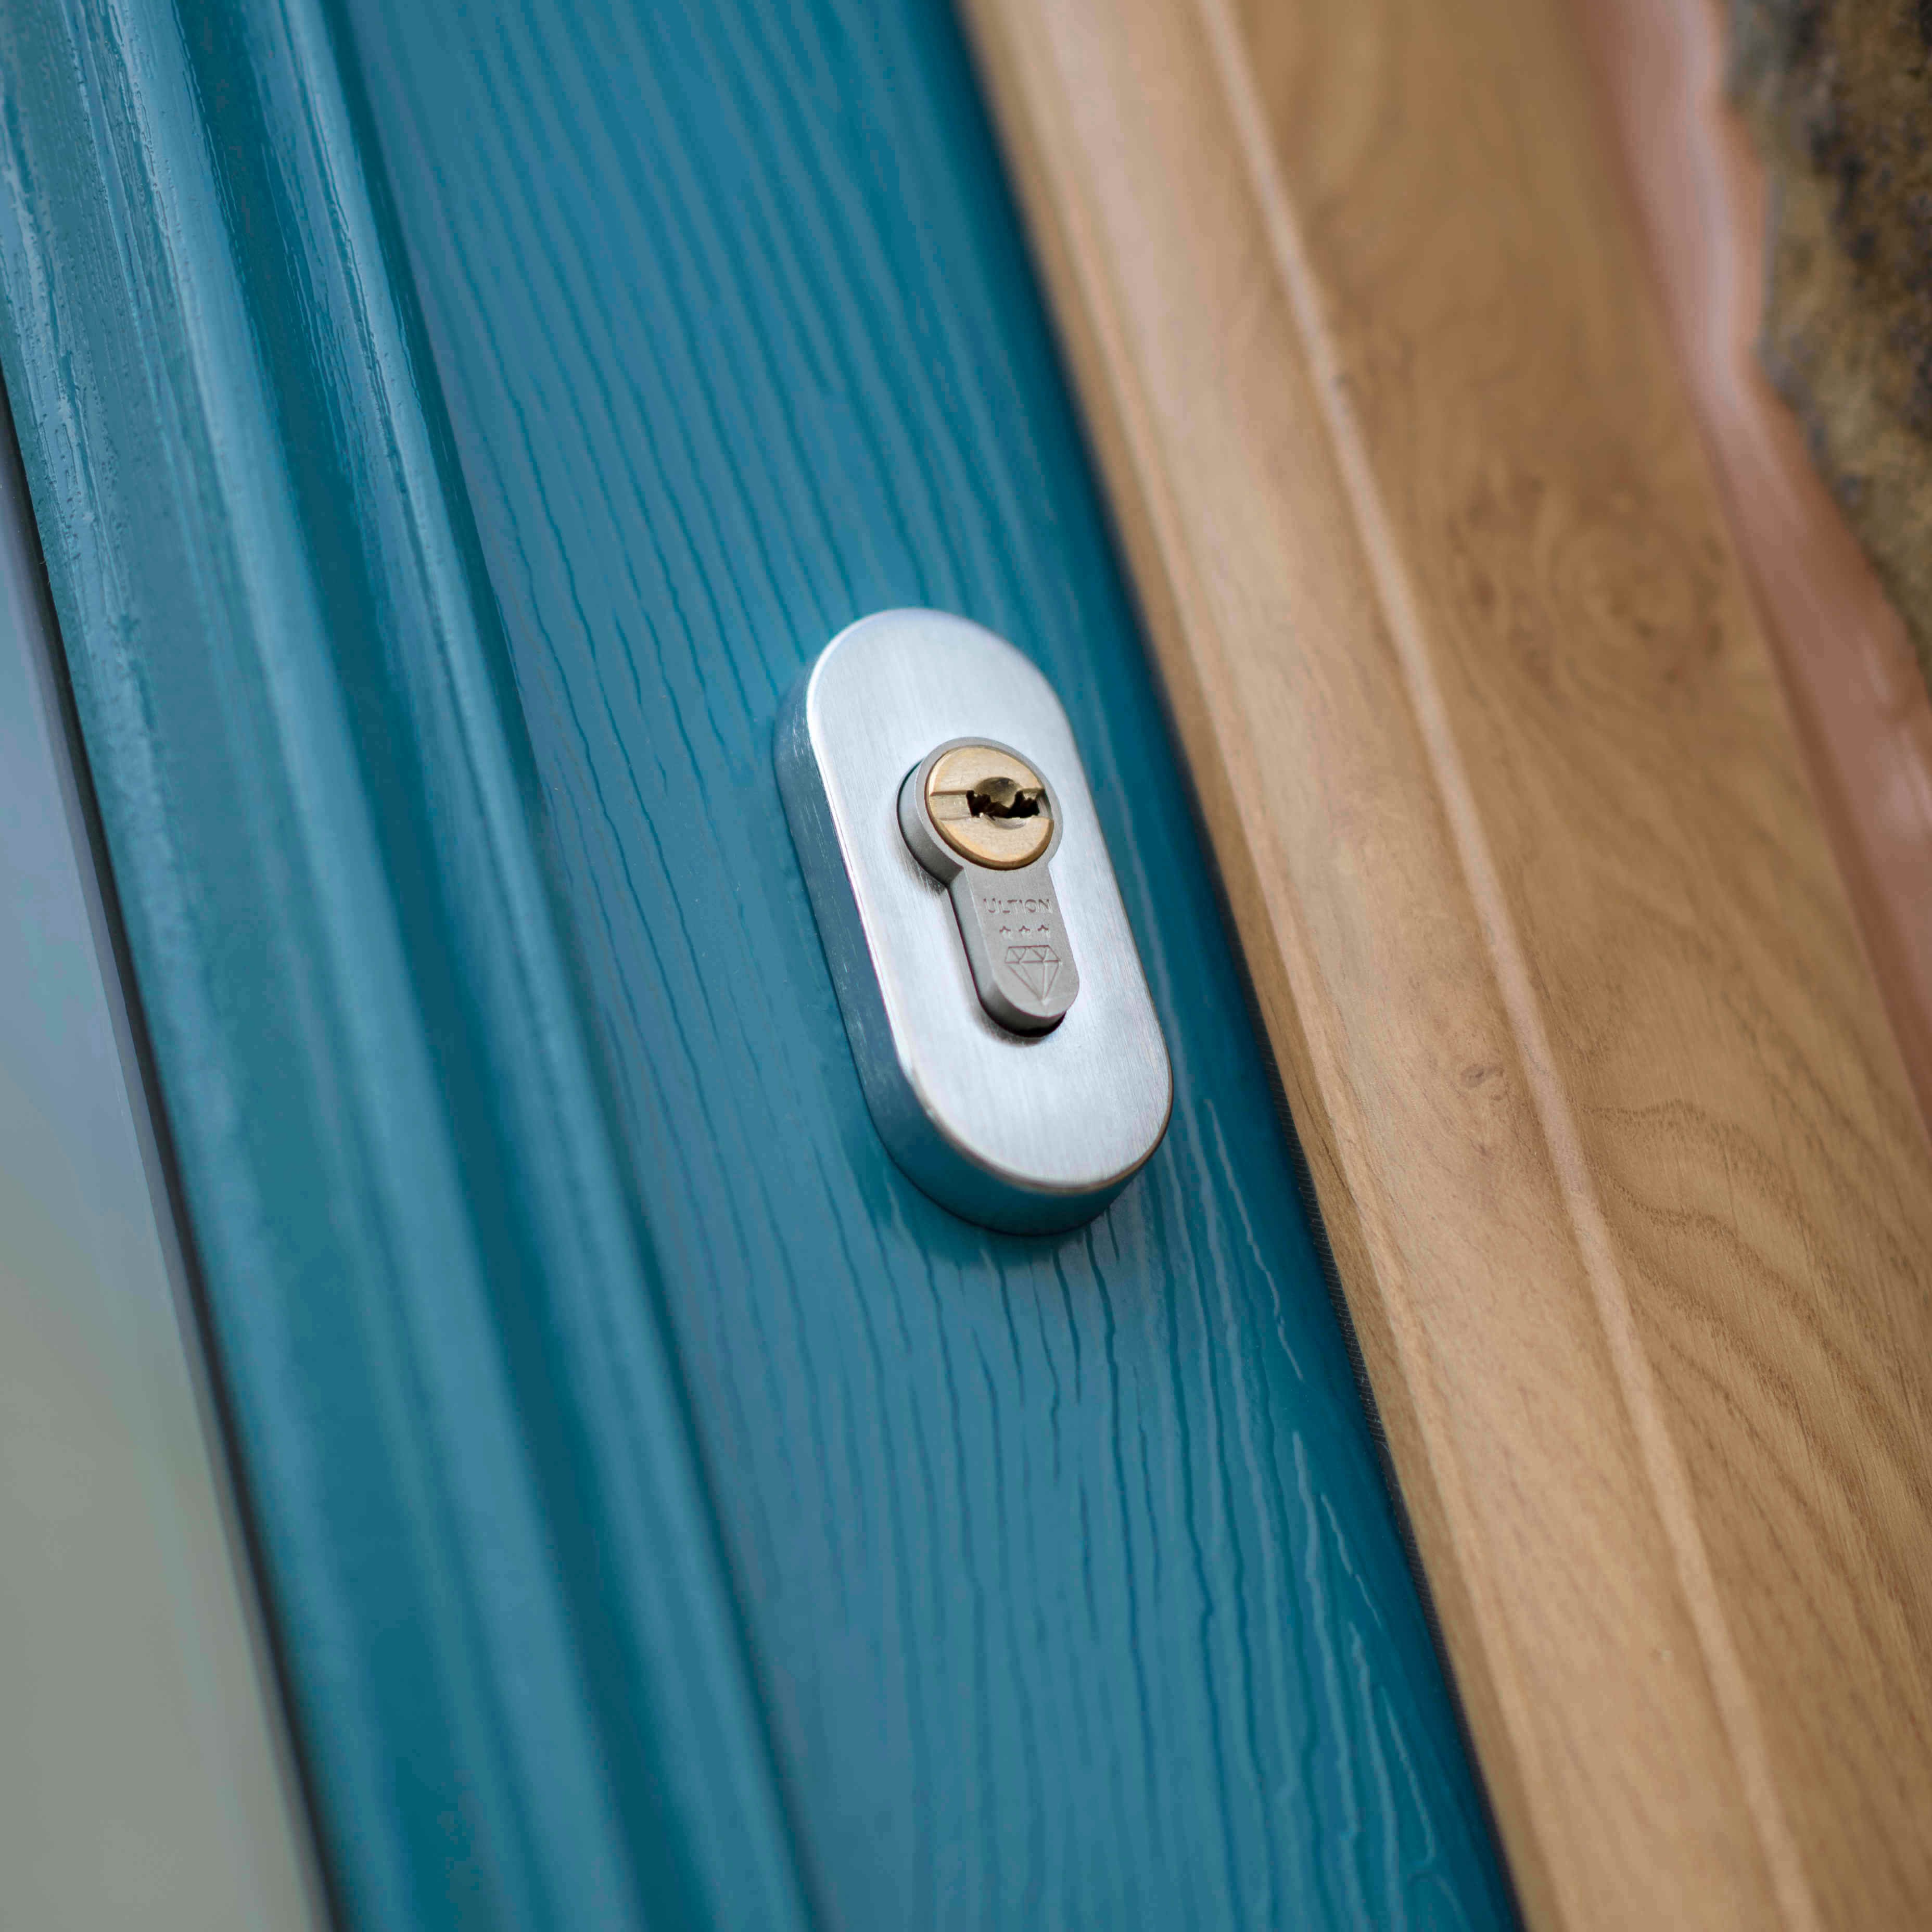 Blue door with wooden frame focused on silver ultion key lock